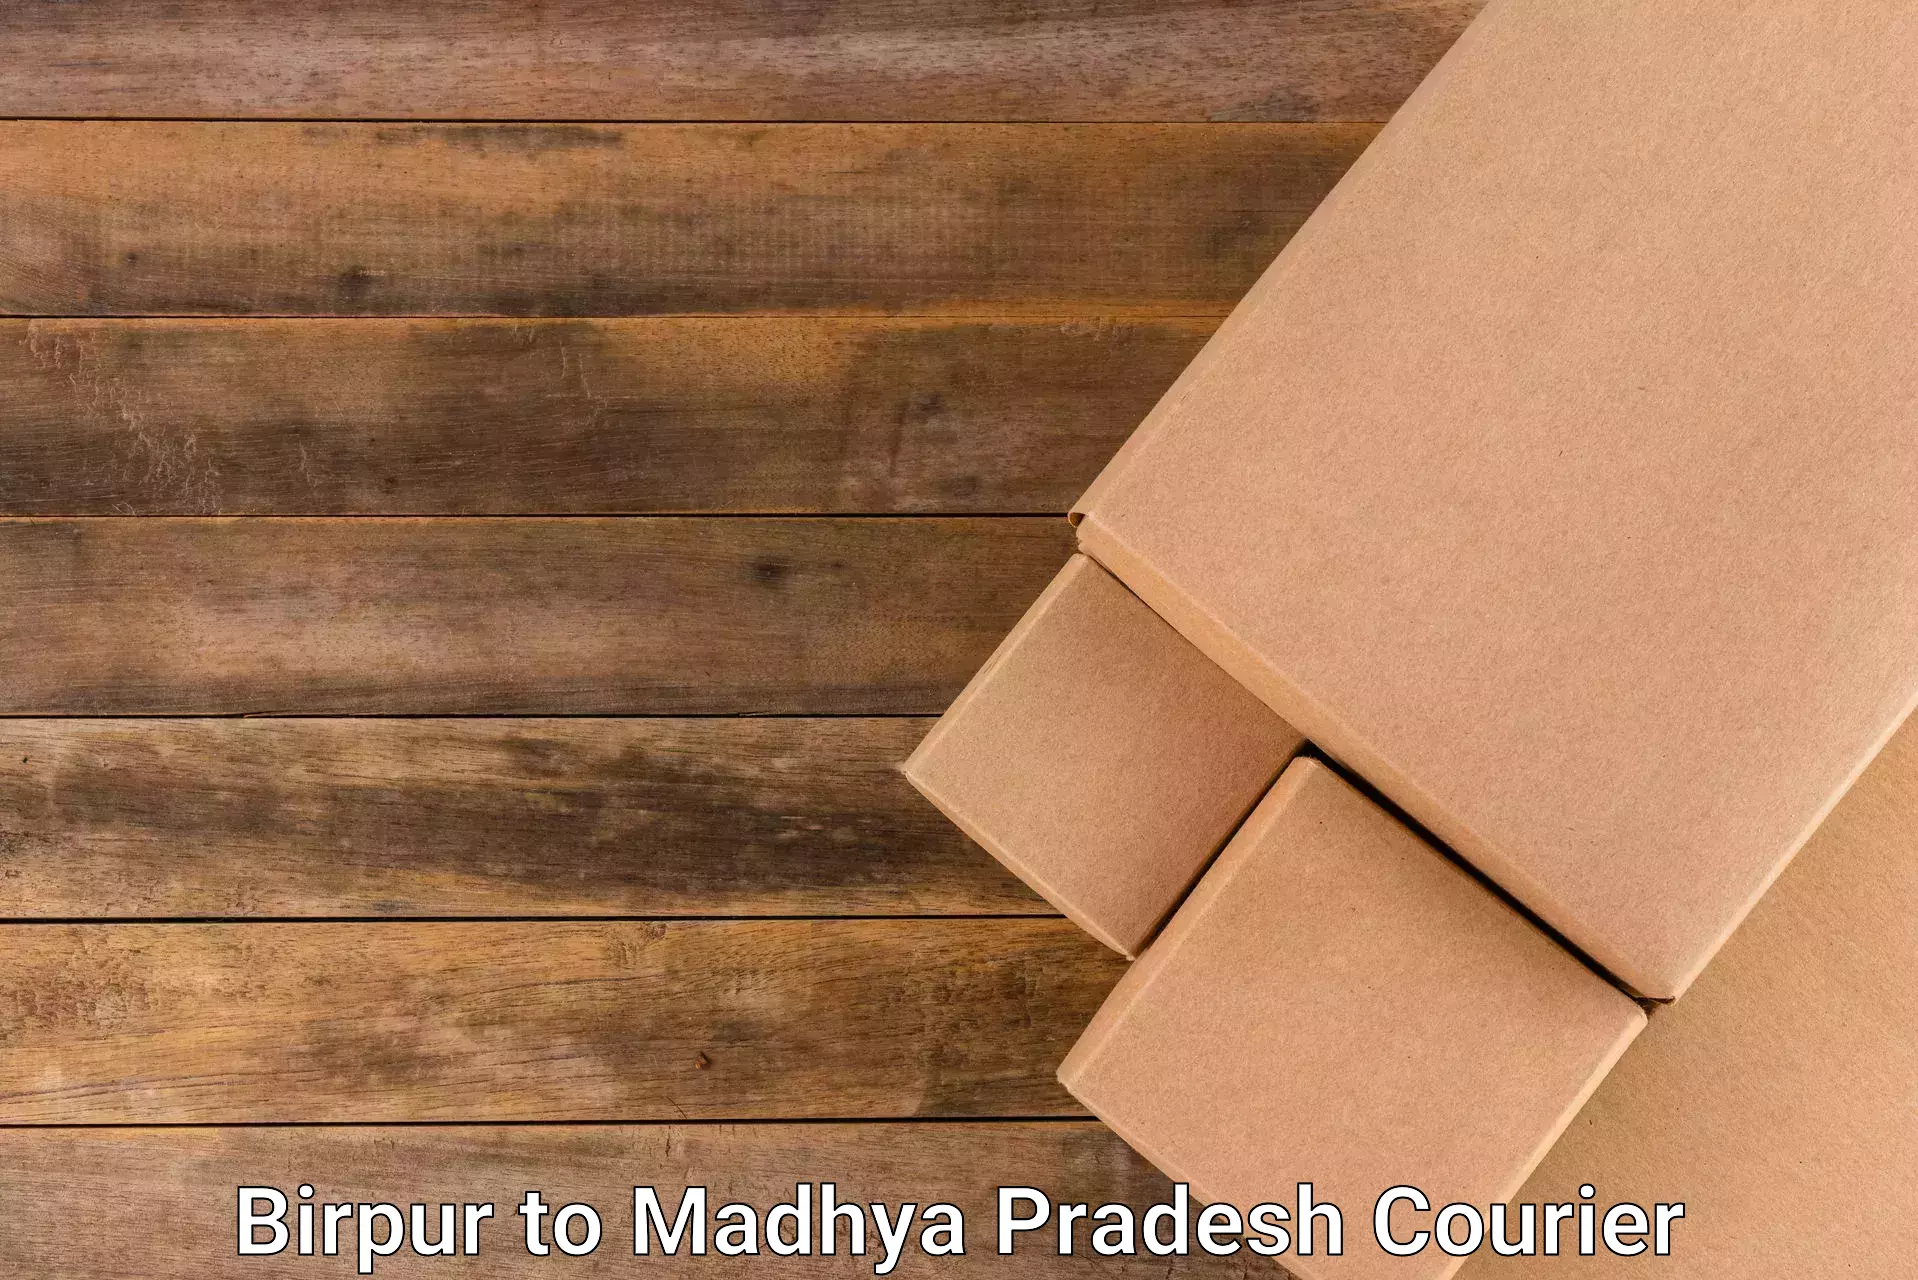 Professional courier handling Birpur to Pachore